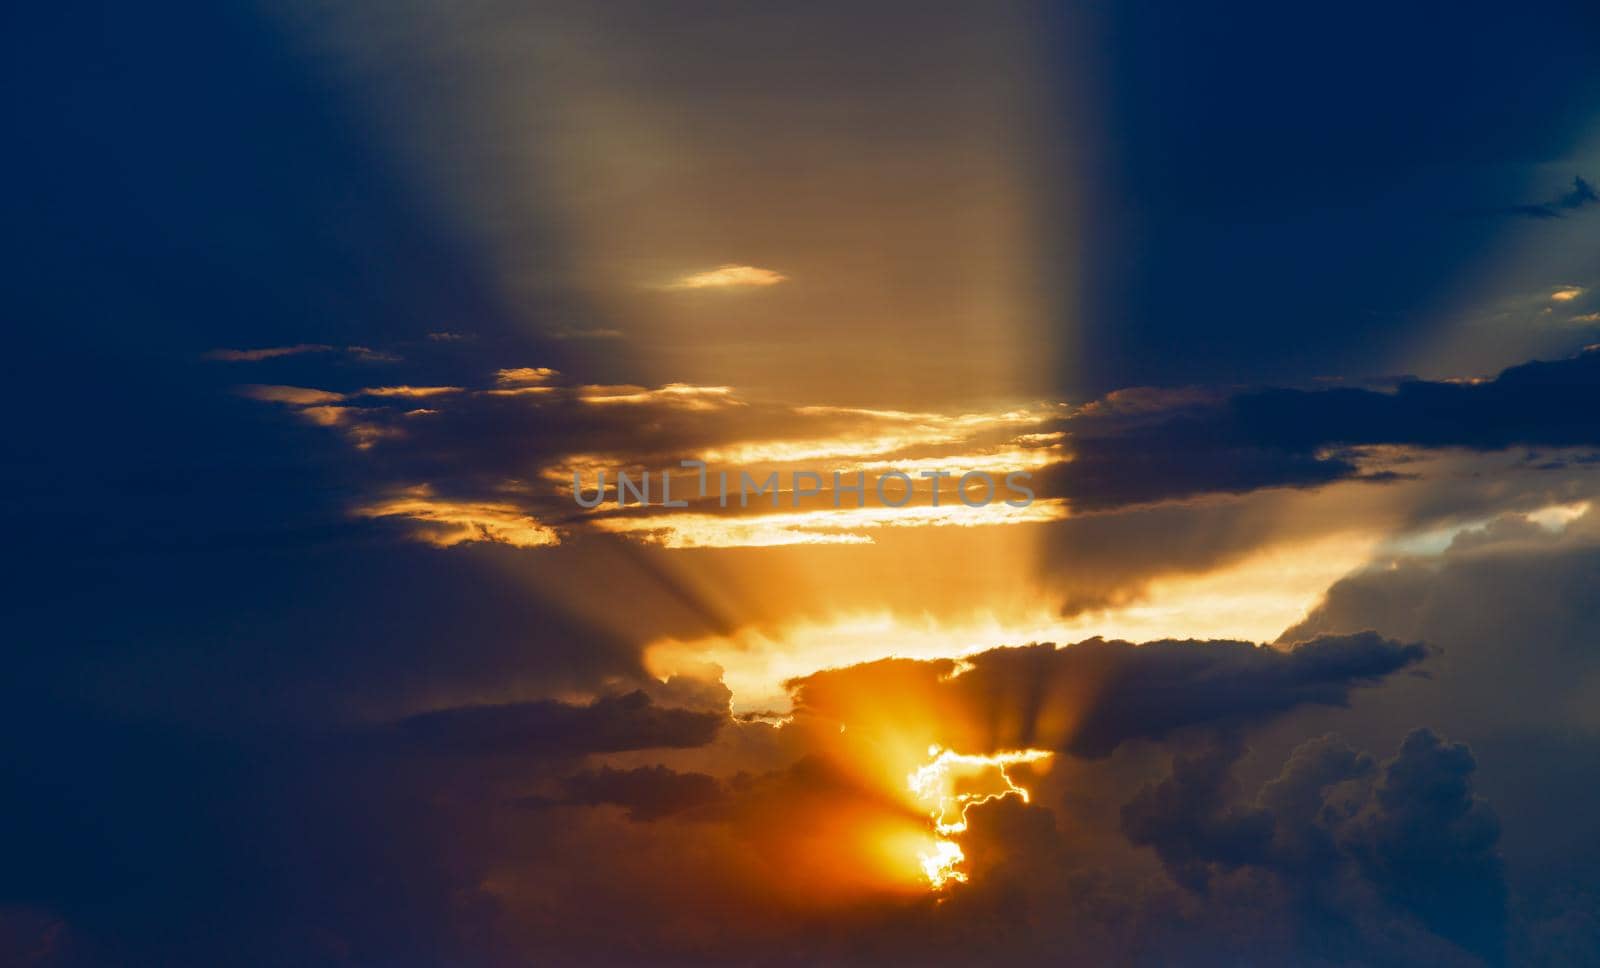 cloudy sunset sky with yellow sun rays without horizon, captured with 100mm lens